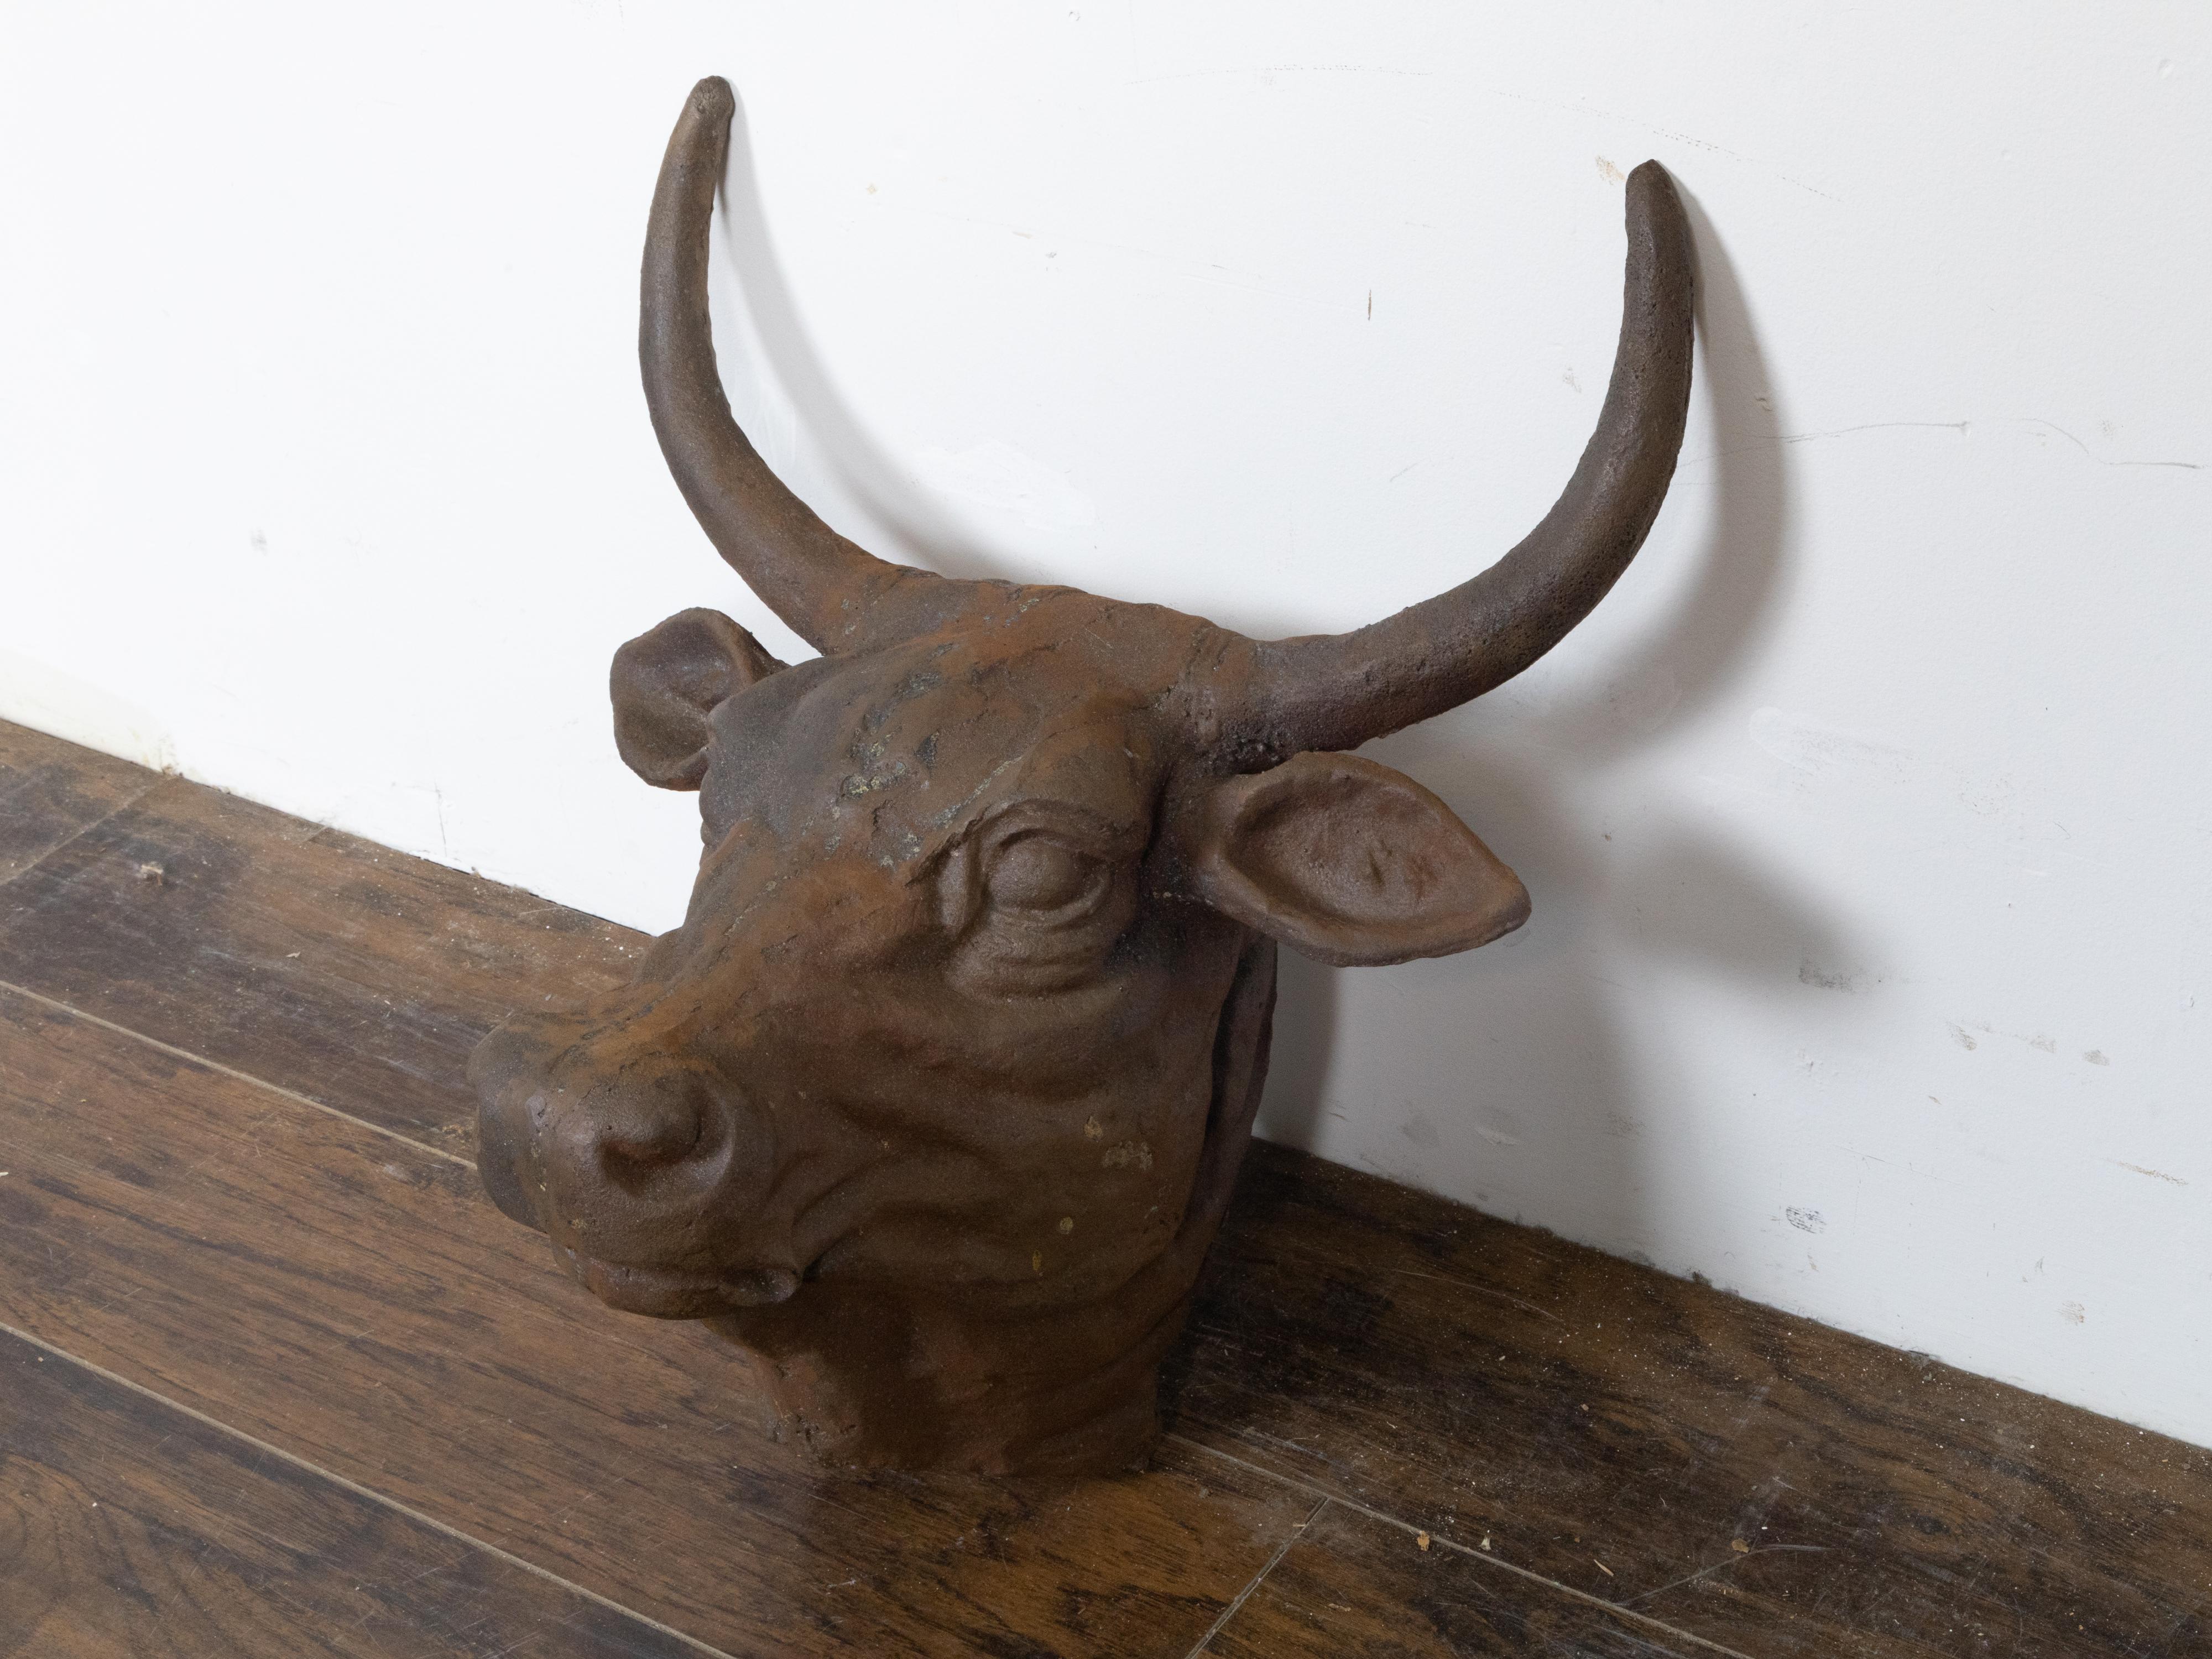 English 1930s-1940s Cast Iron Bull Wall Hanging Sculpture with Rusty Patina In Good Condition For Sale In Atlanta, GA